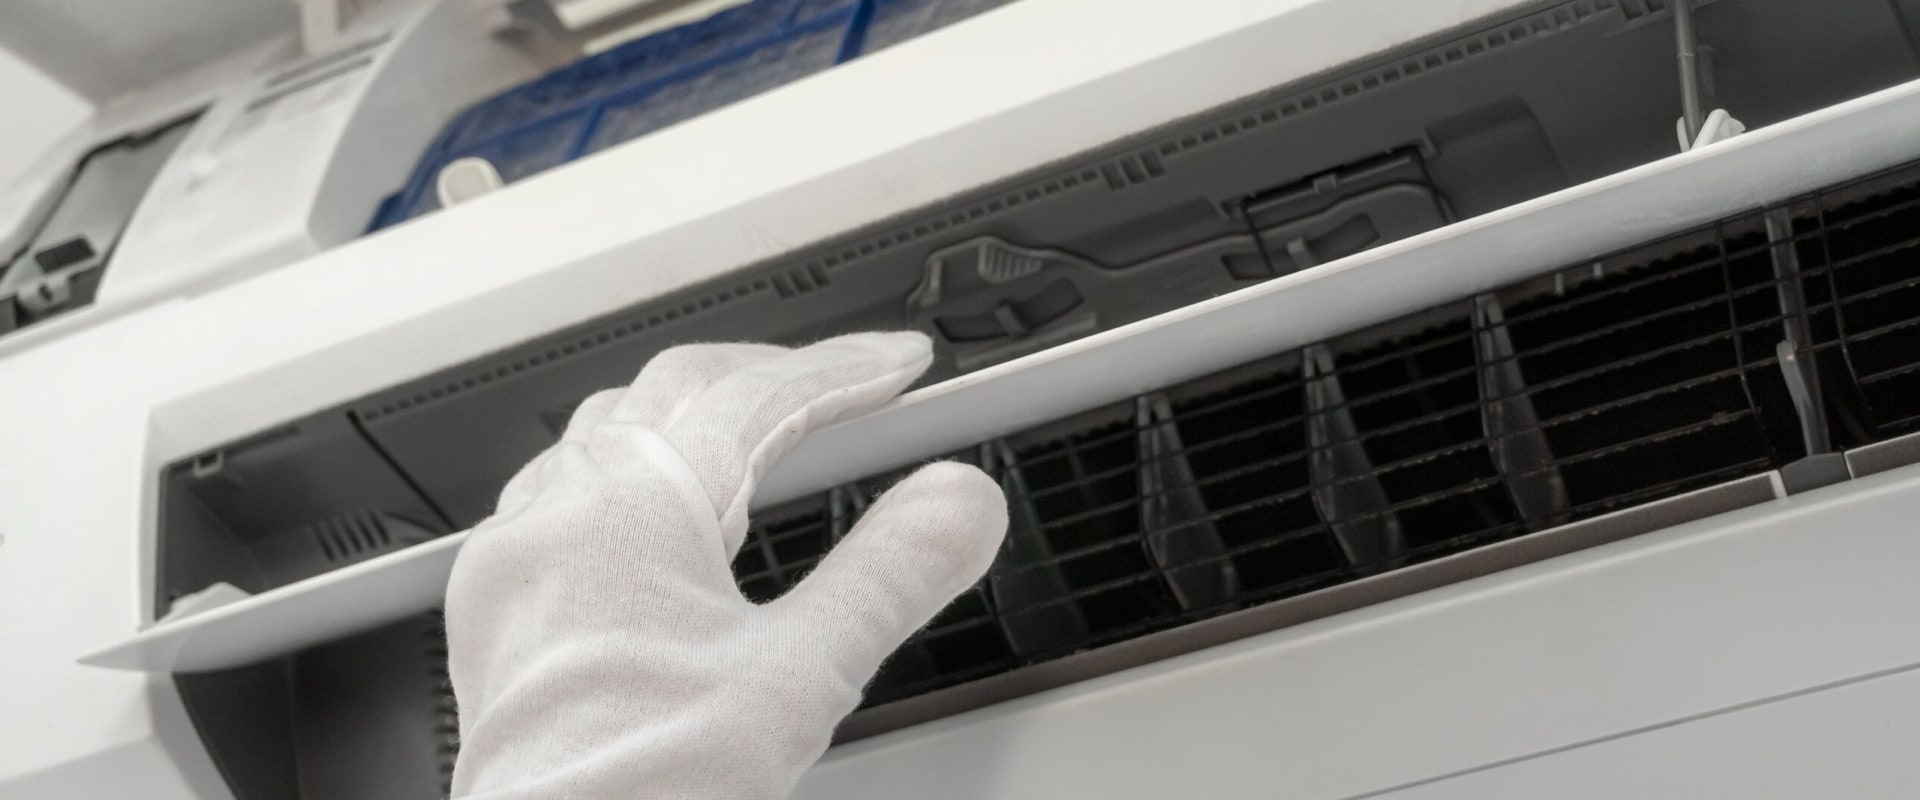 4 Essential Areas to Check During HVAC Start Up